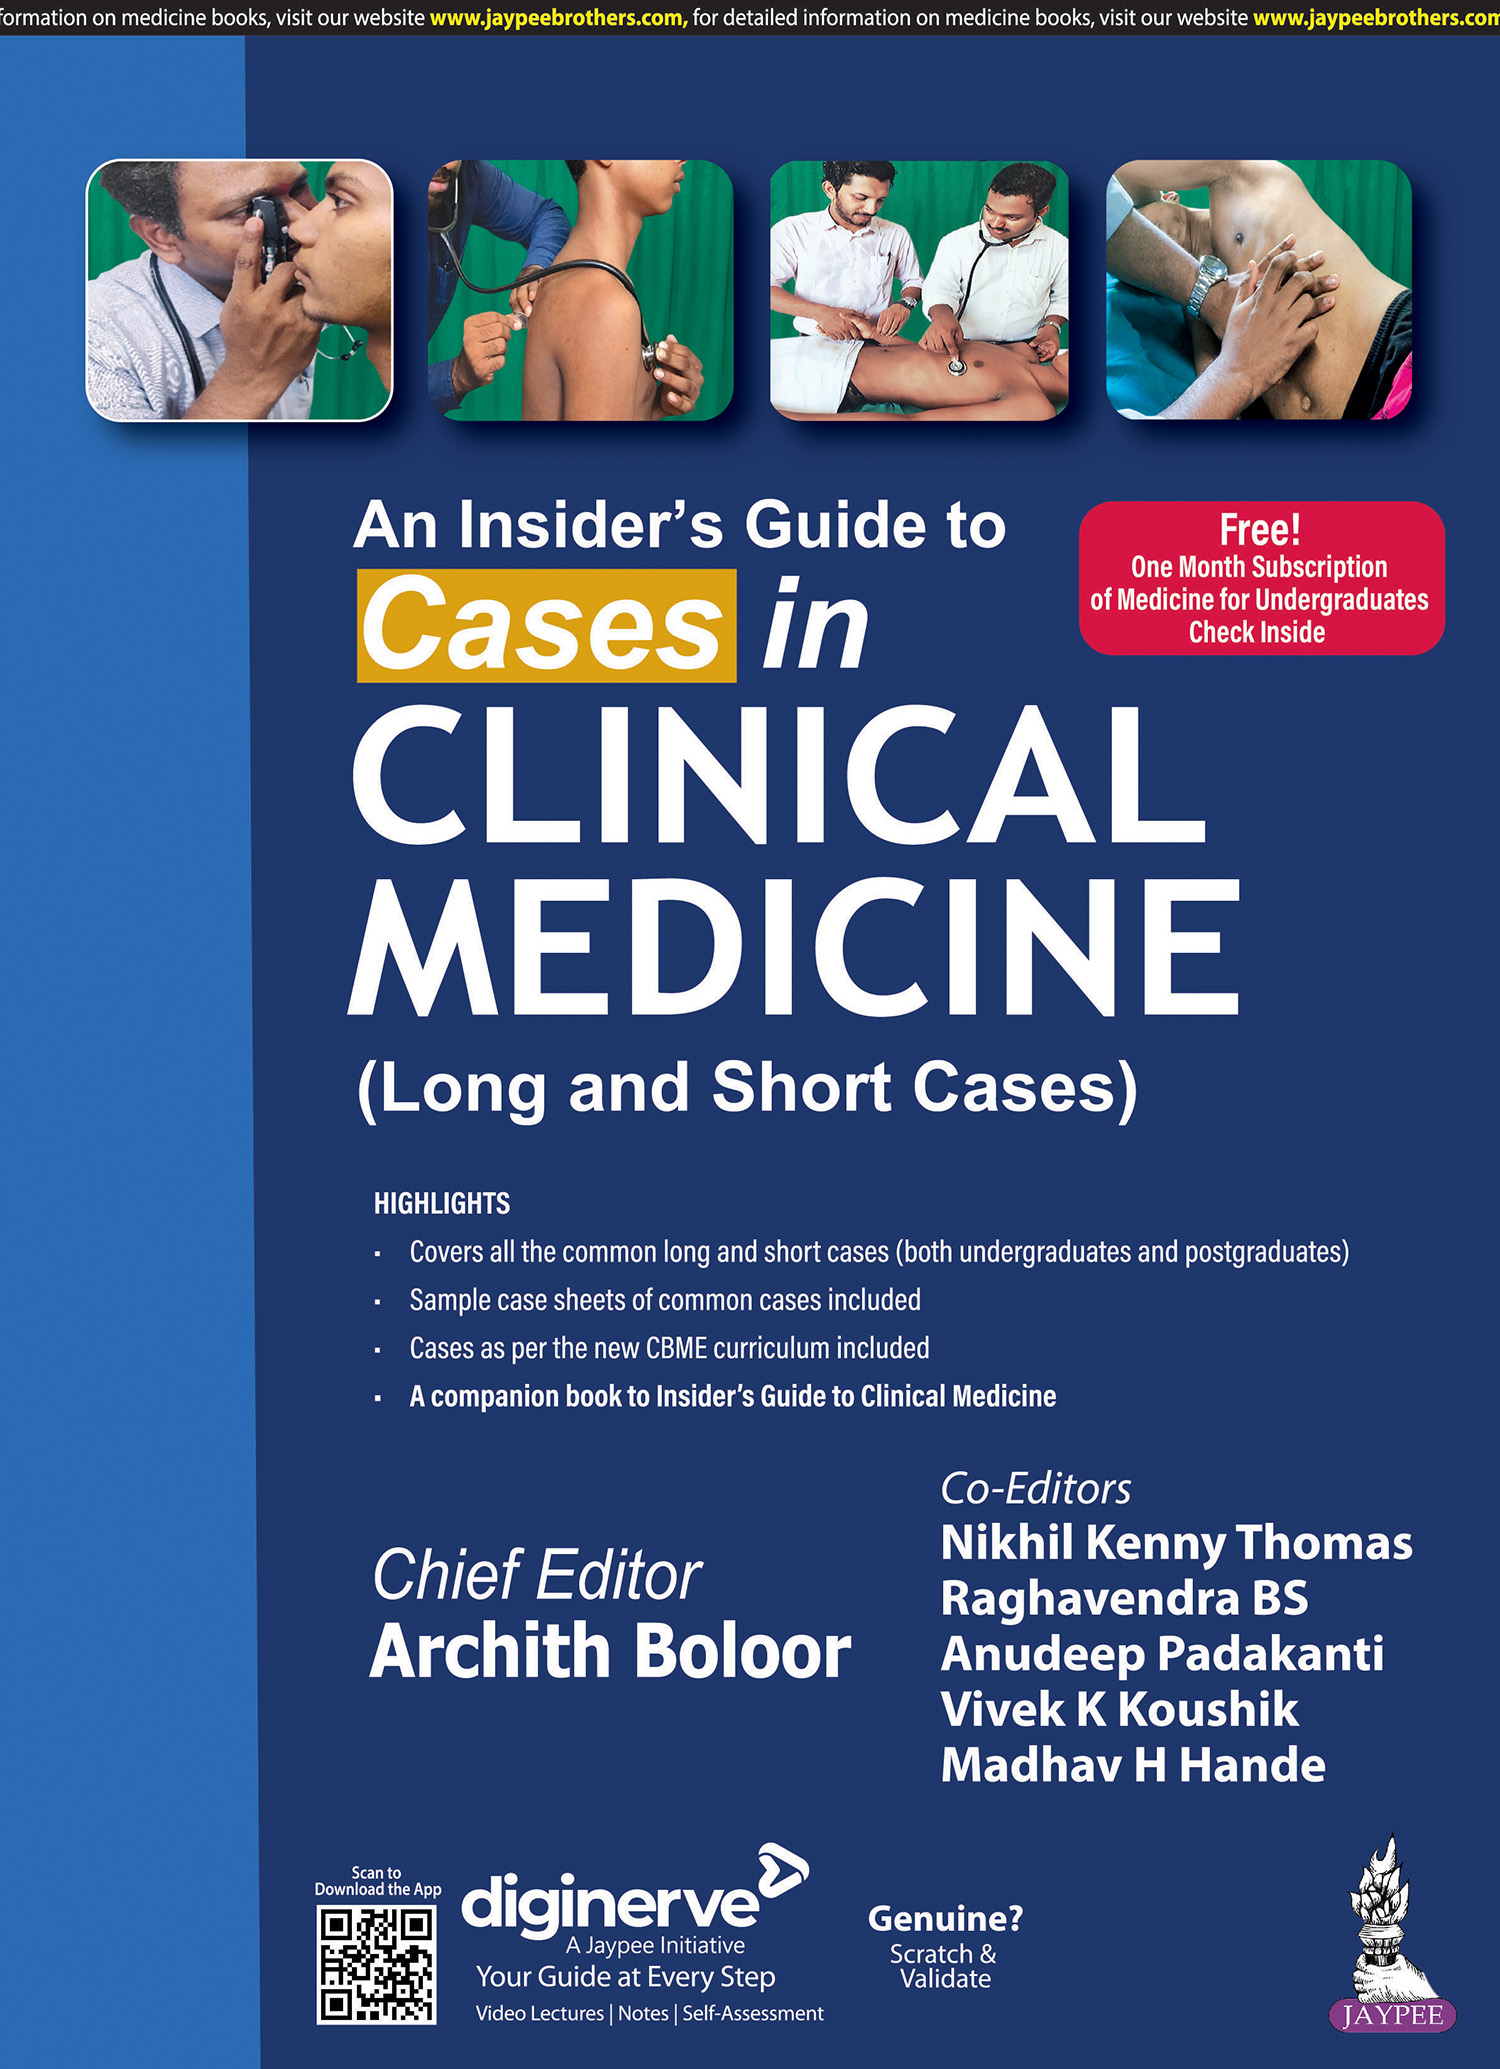 An Insider’s Guide to Cases in Clinical Medicine (Long and Short Cases)